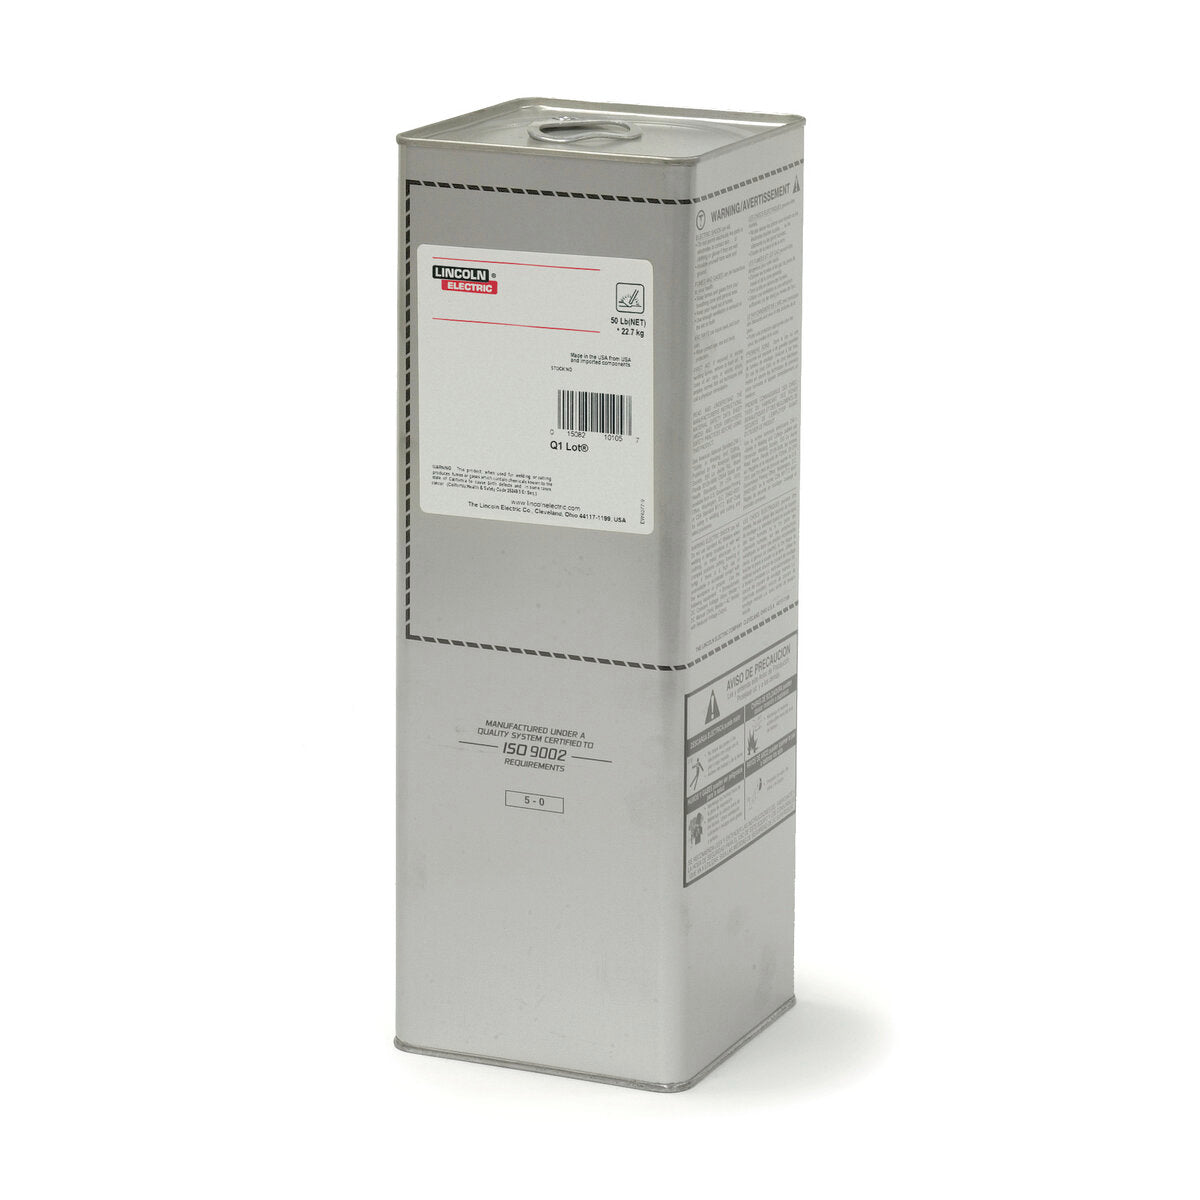 Lincoln Electric - Fleetweld® 22 Stick (SMAW) Electrode, 5/32x14 in, 50 lb Easy Open Can - ED021895